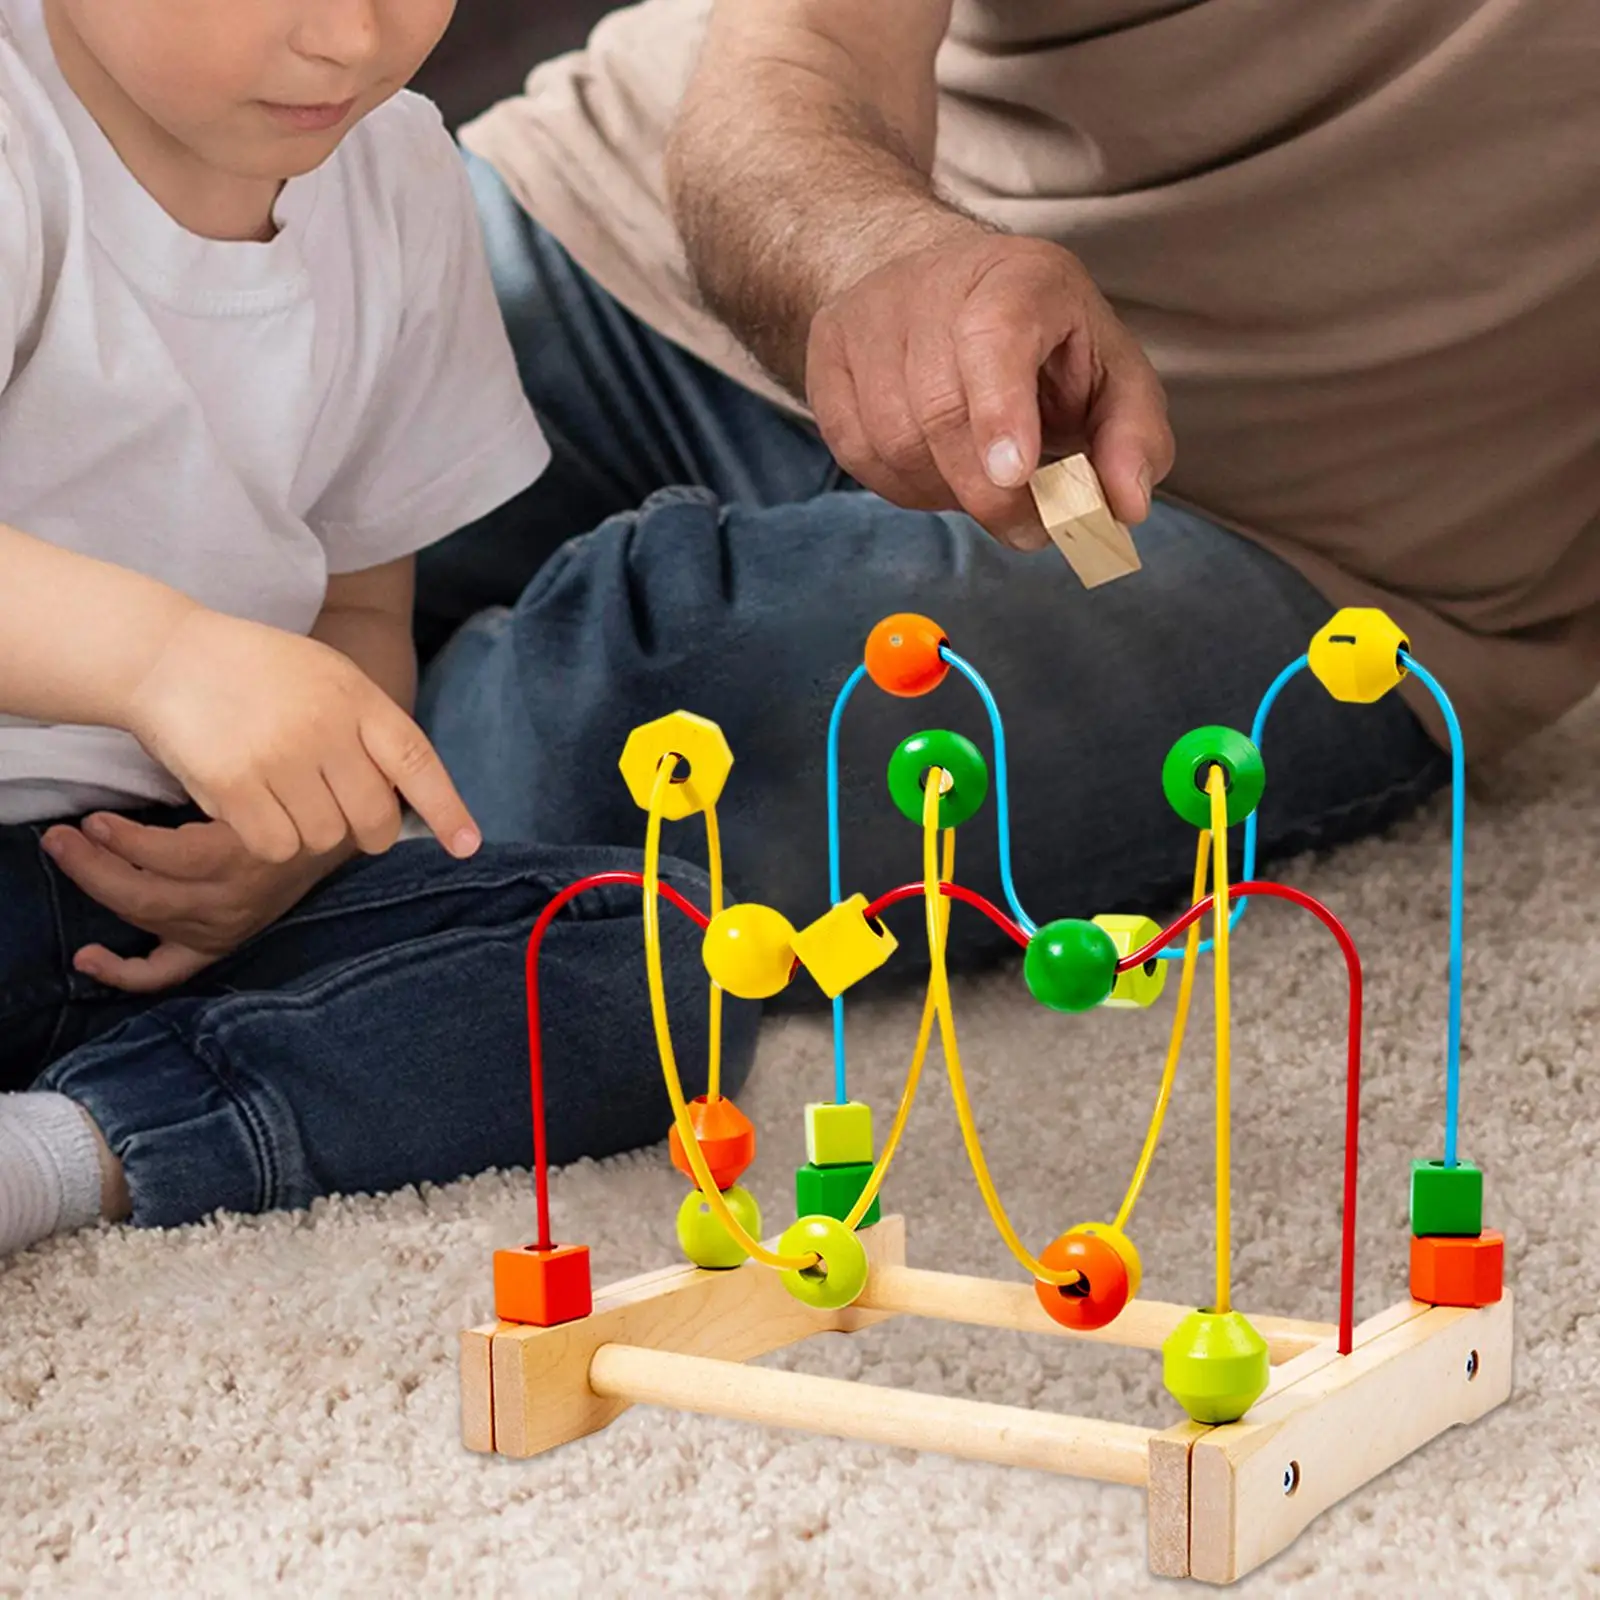 Colorful Roller Coaster, Bead Maze Toy, Wooden Motor Skills Development Toy, Colorful Roller Coaster, for Baby